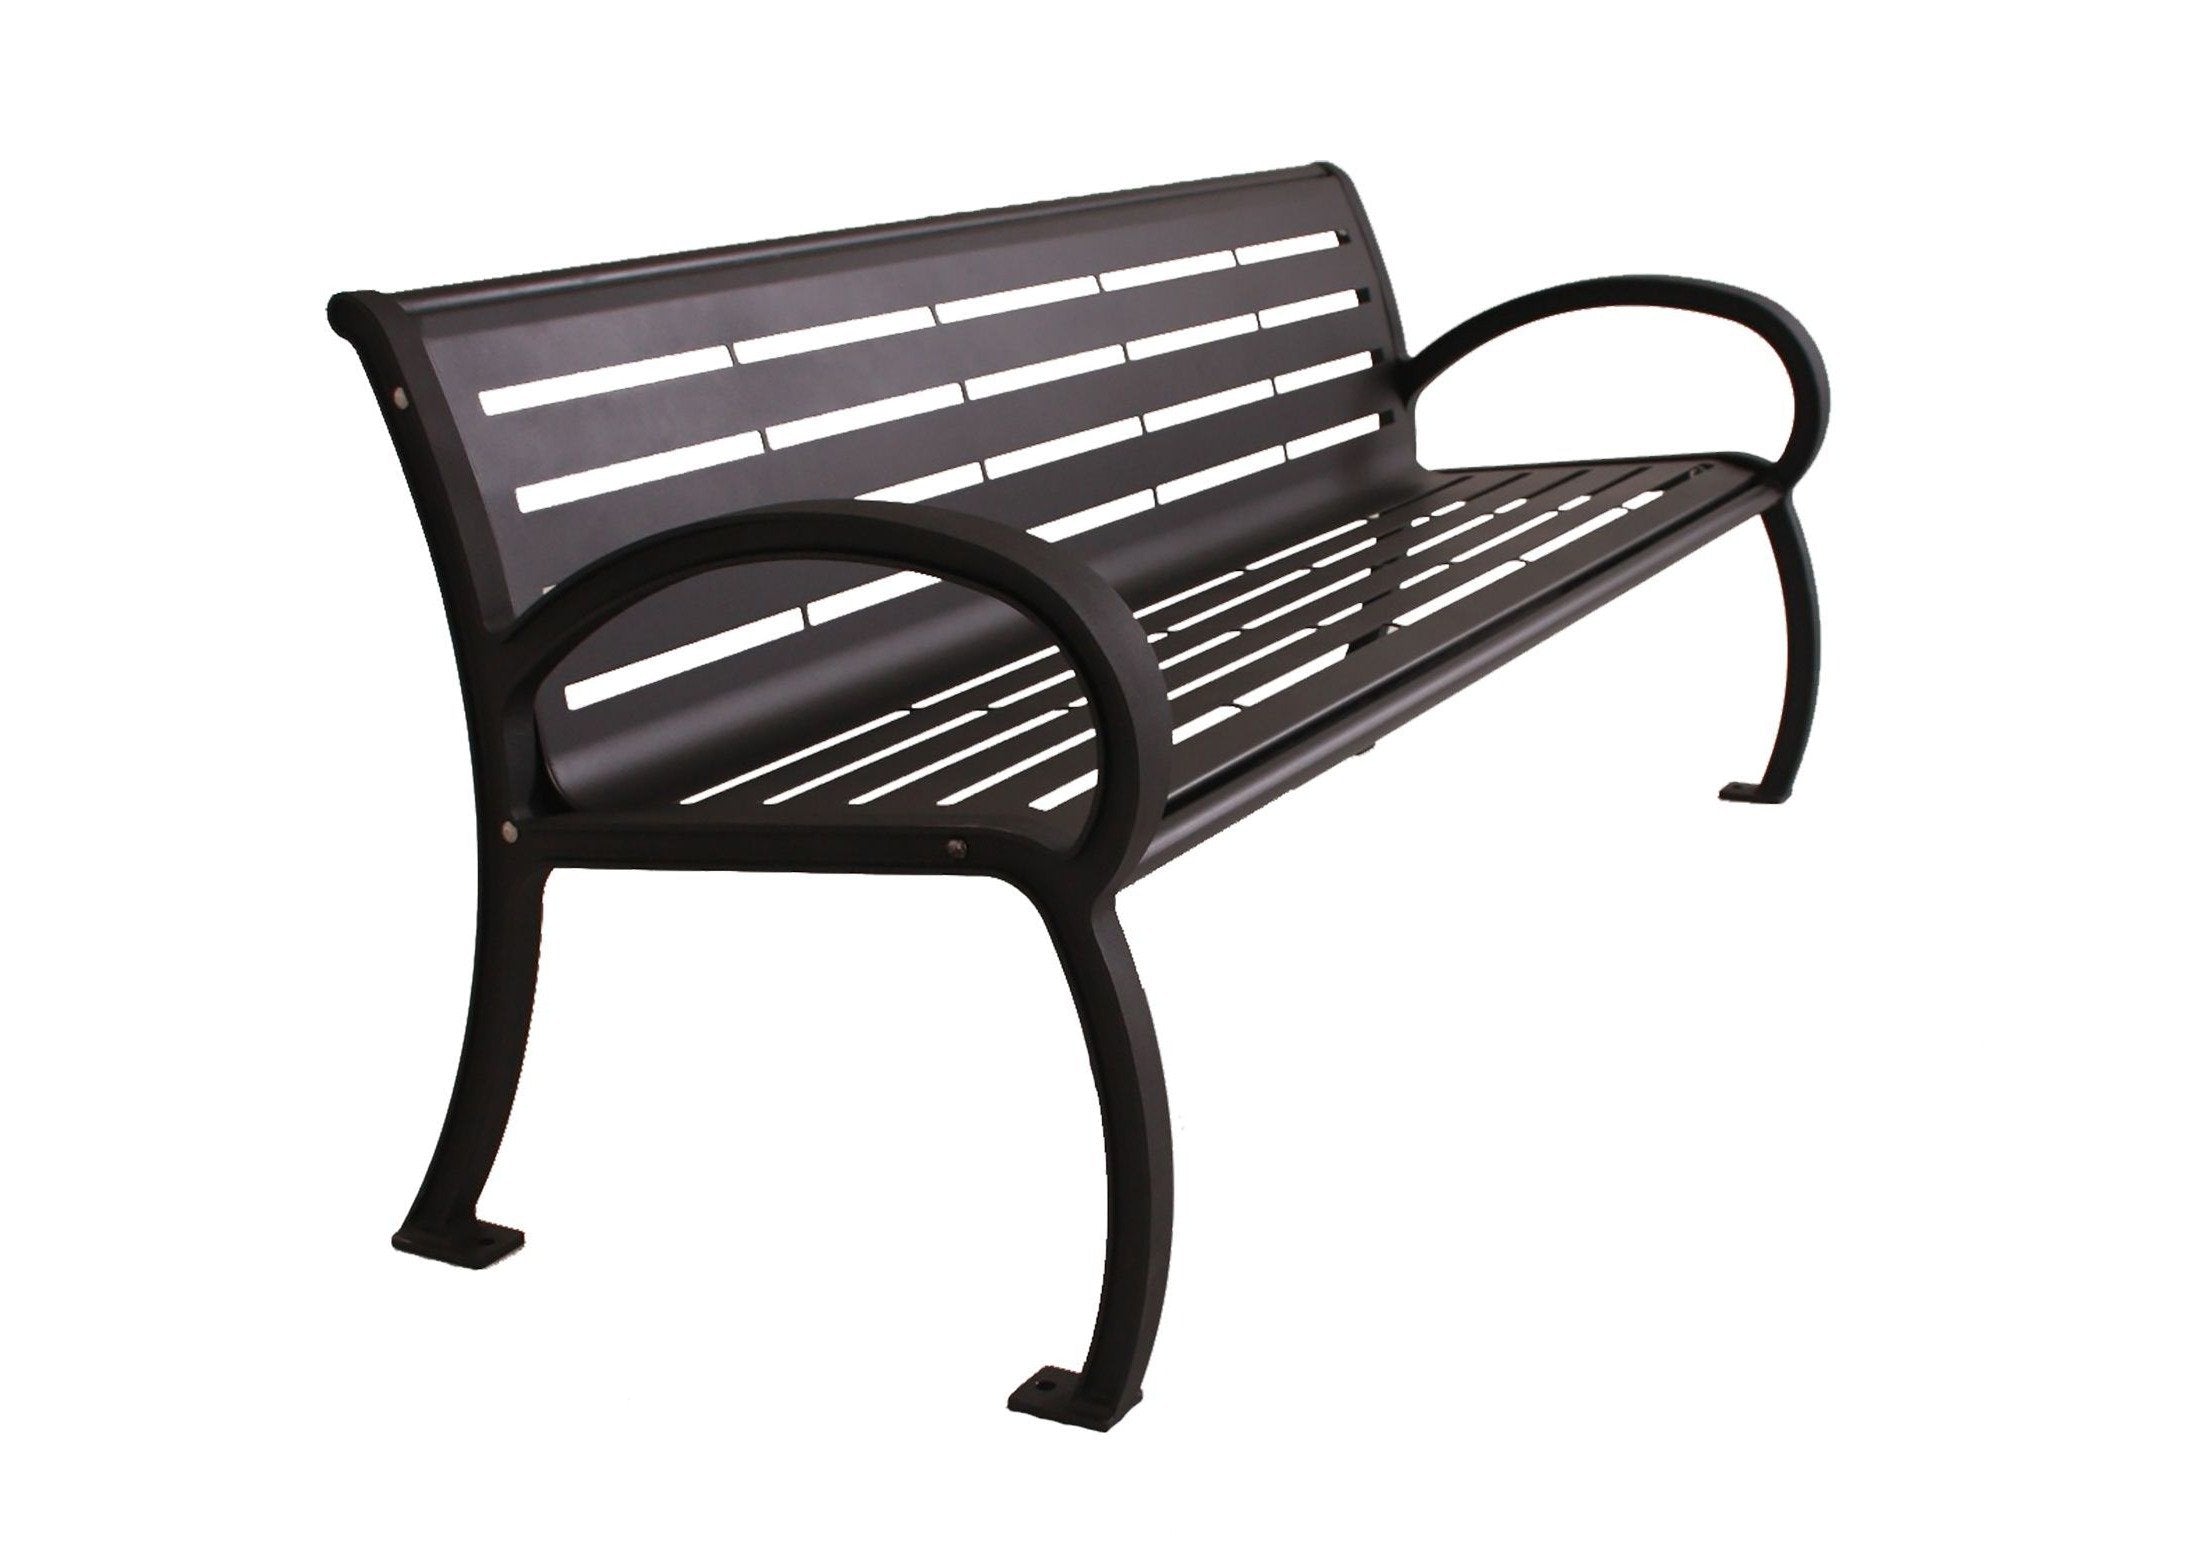 Wilmington Horizontal Slat Bench with Back | WillyGoat Playground & Park Equipment